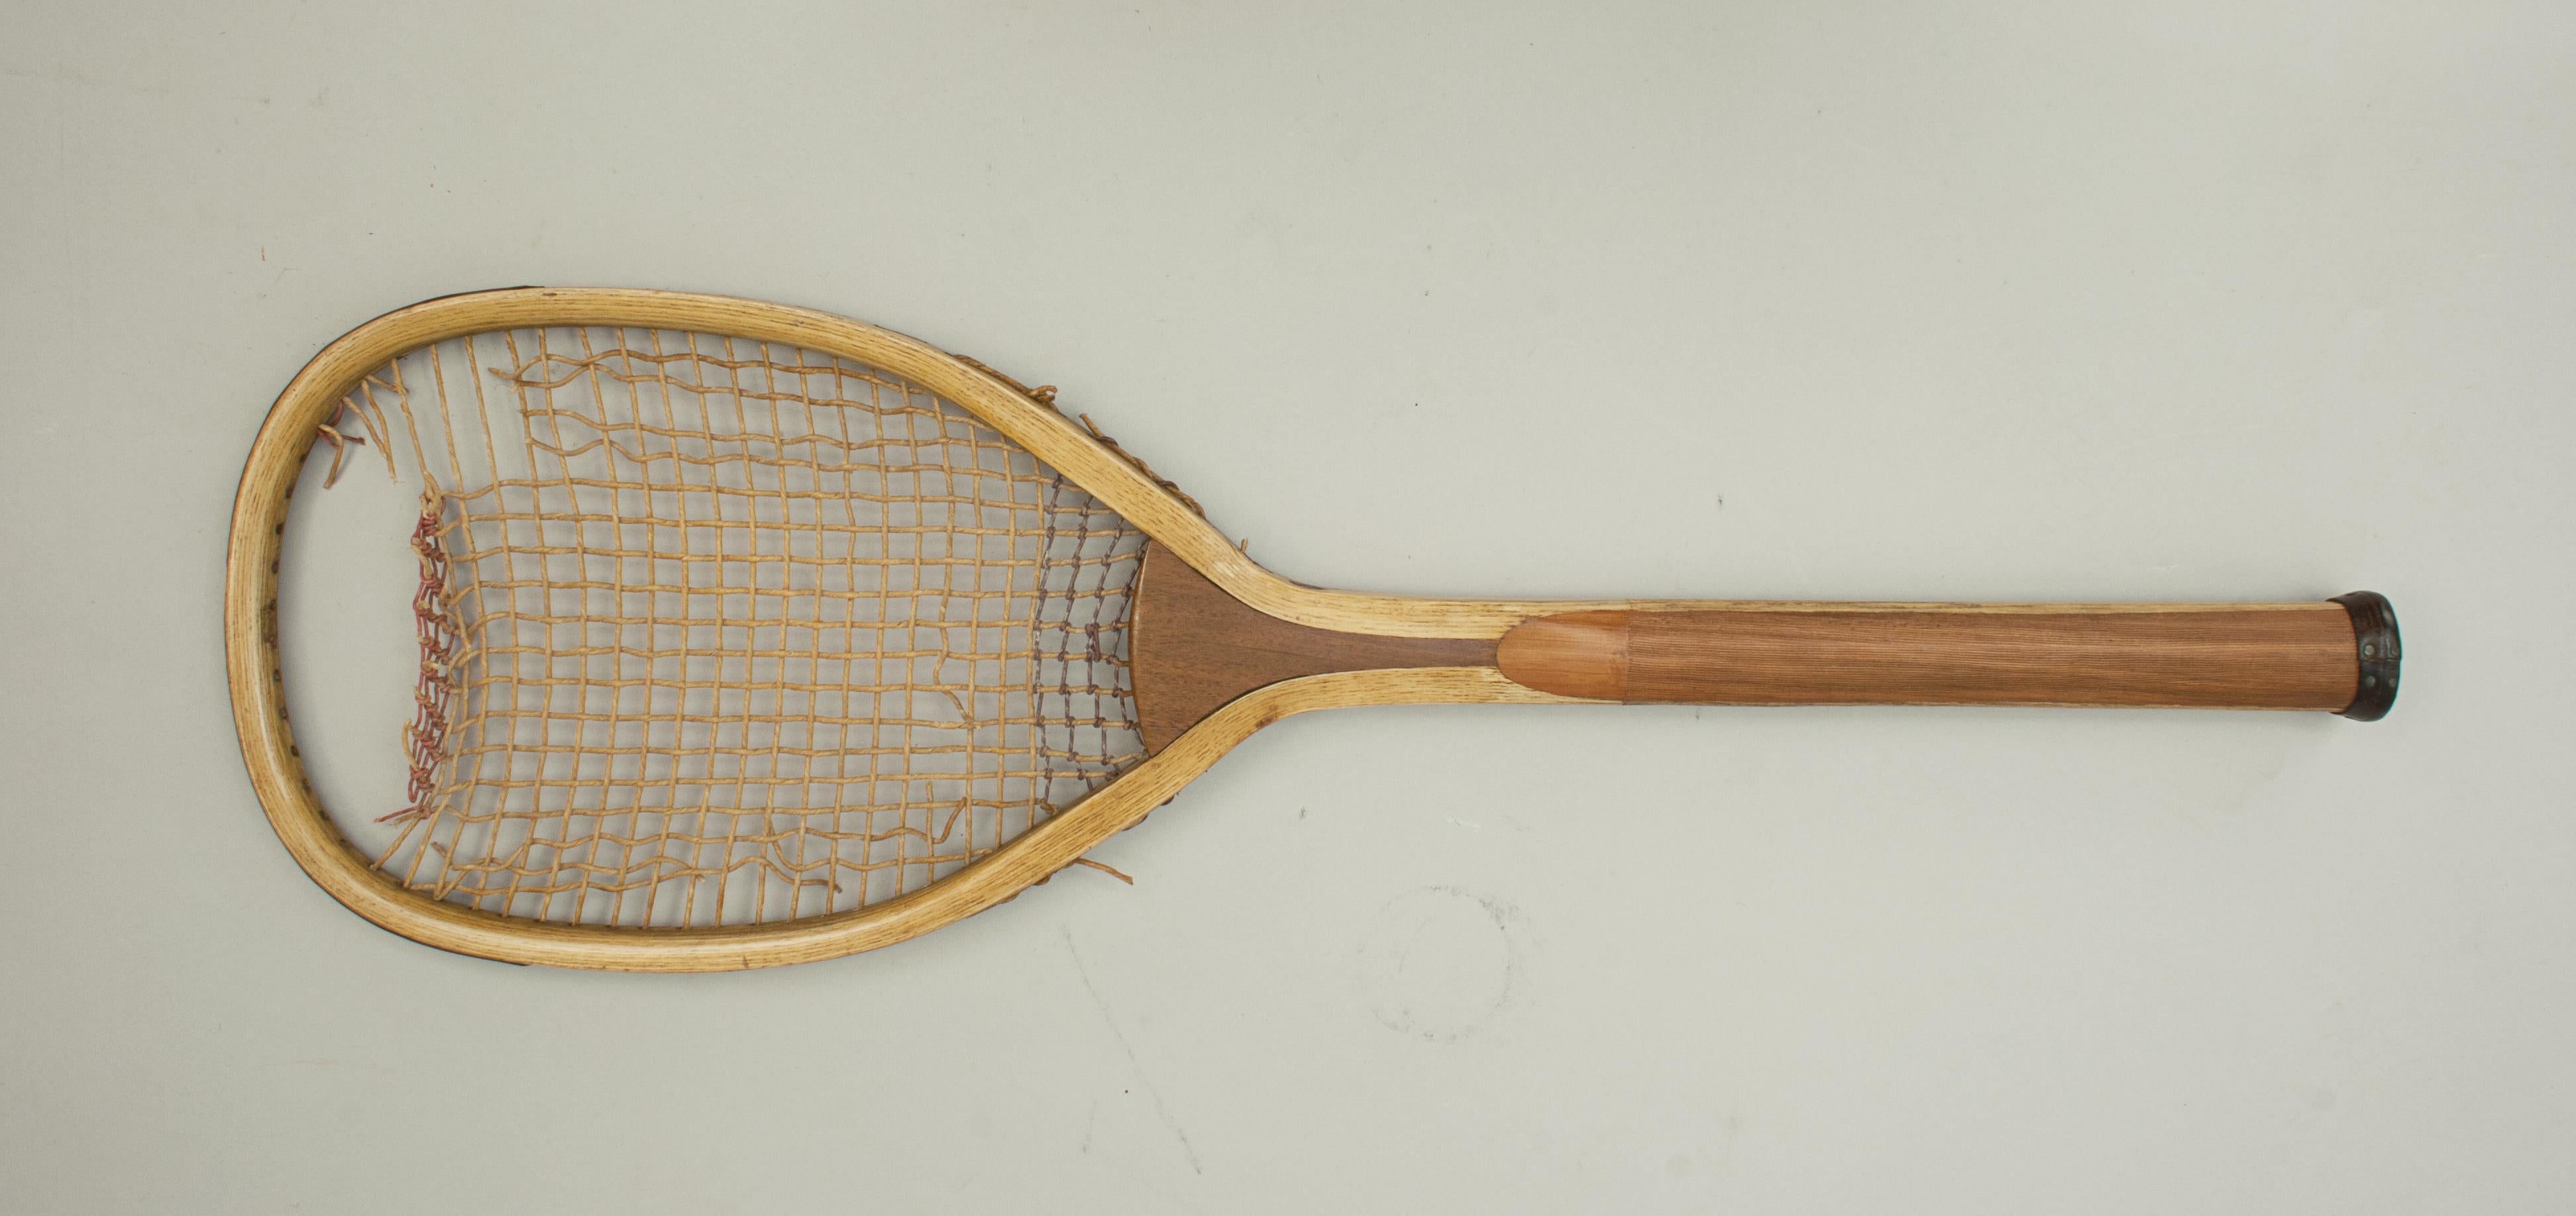 Early thick gut strung lawn tennis rackets.
A rare pair of early lawn tennis racquets in good original condition by H. Richardson, U.S.A. The ash frames are in very good condition, still with the leather strip on the top edge of the frame. The